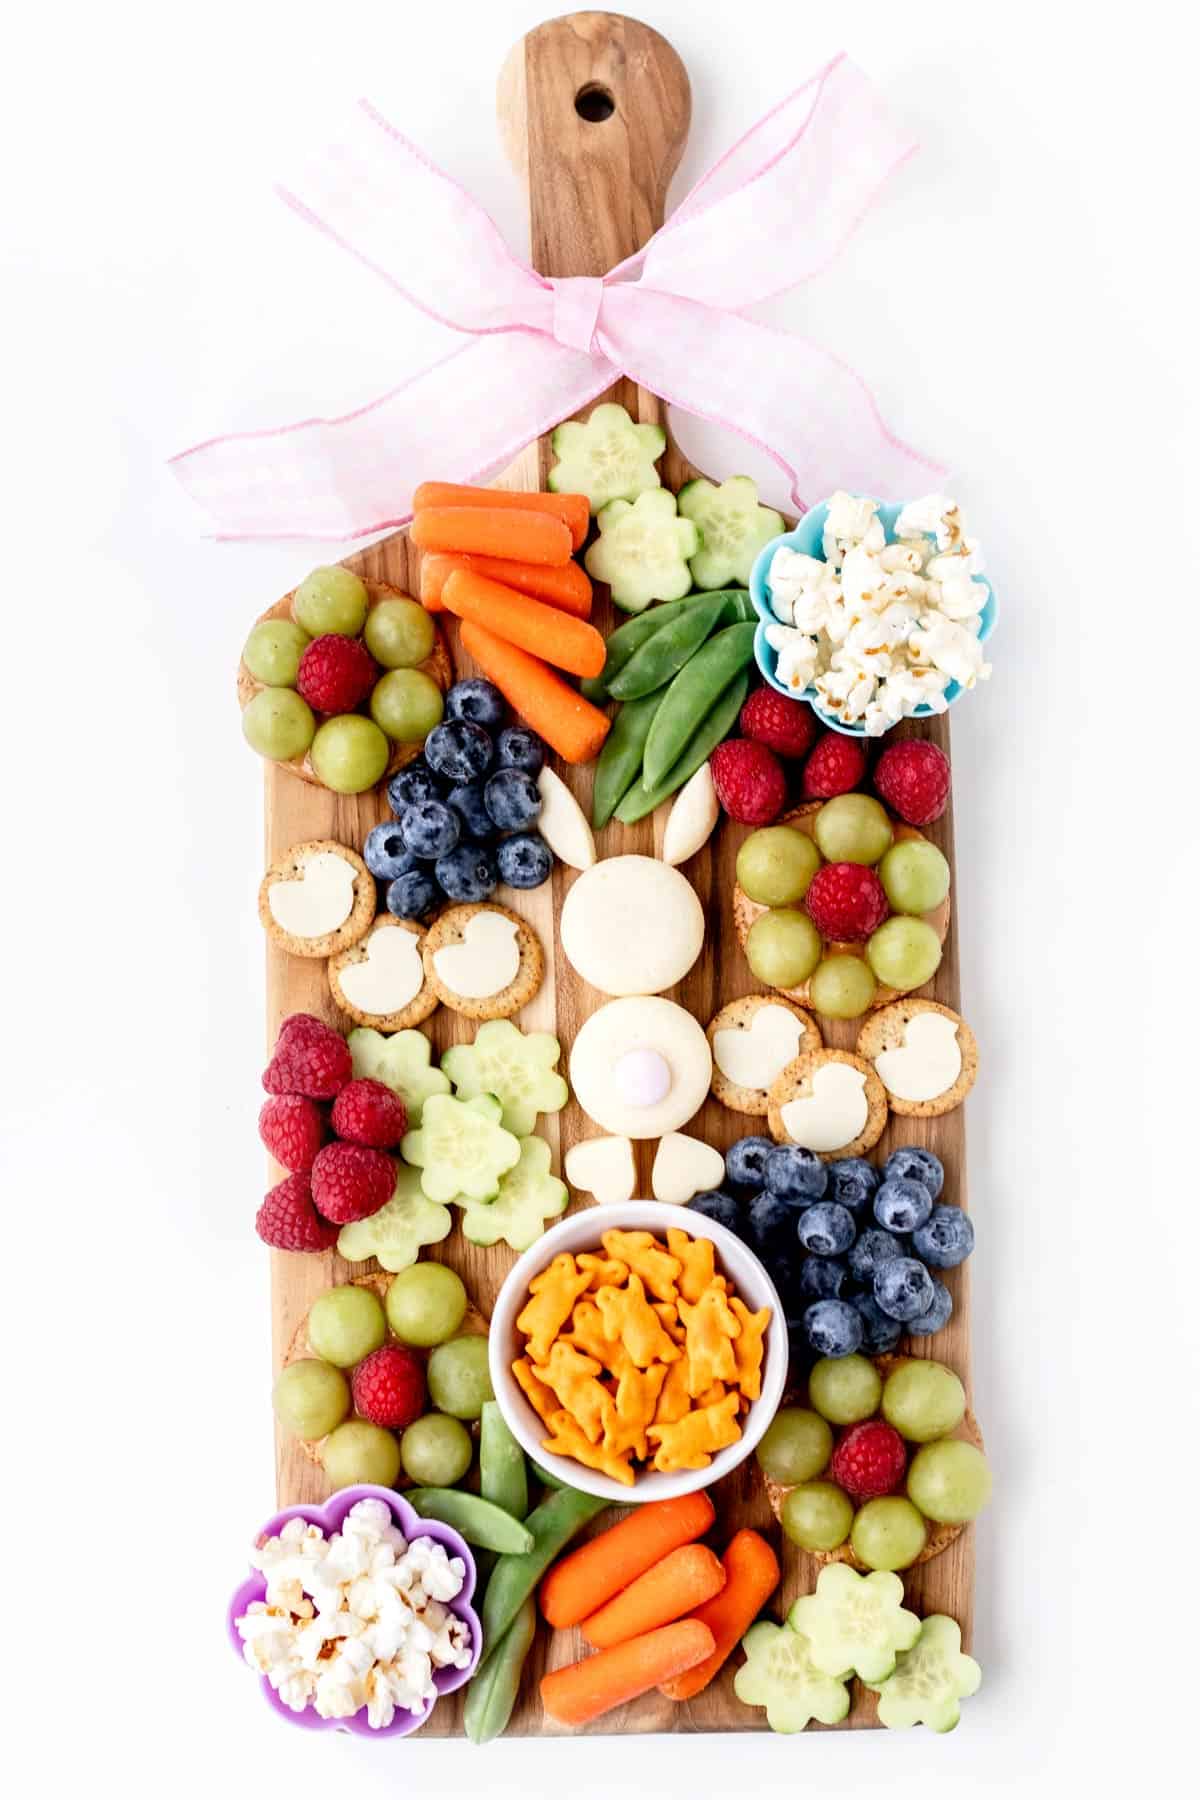 An Easter bunny snack board, with an Easter bunny made of baby bel cheese and surrounded by various snacks.